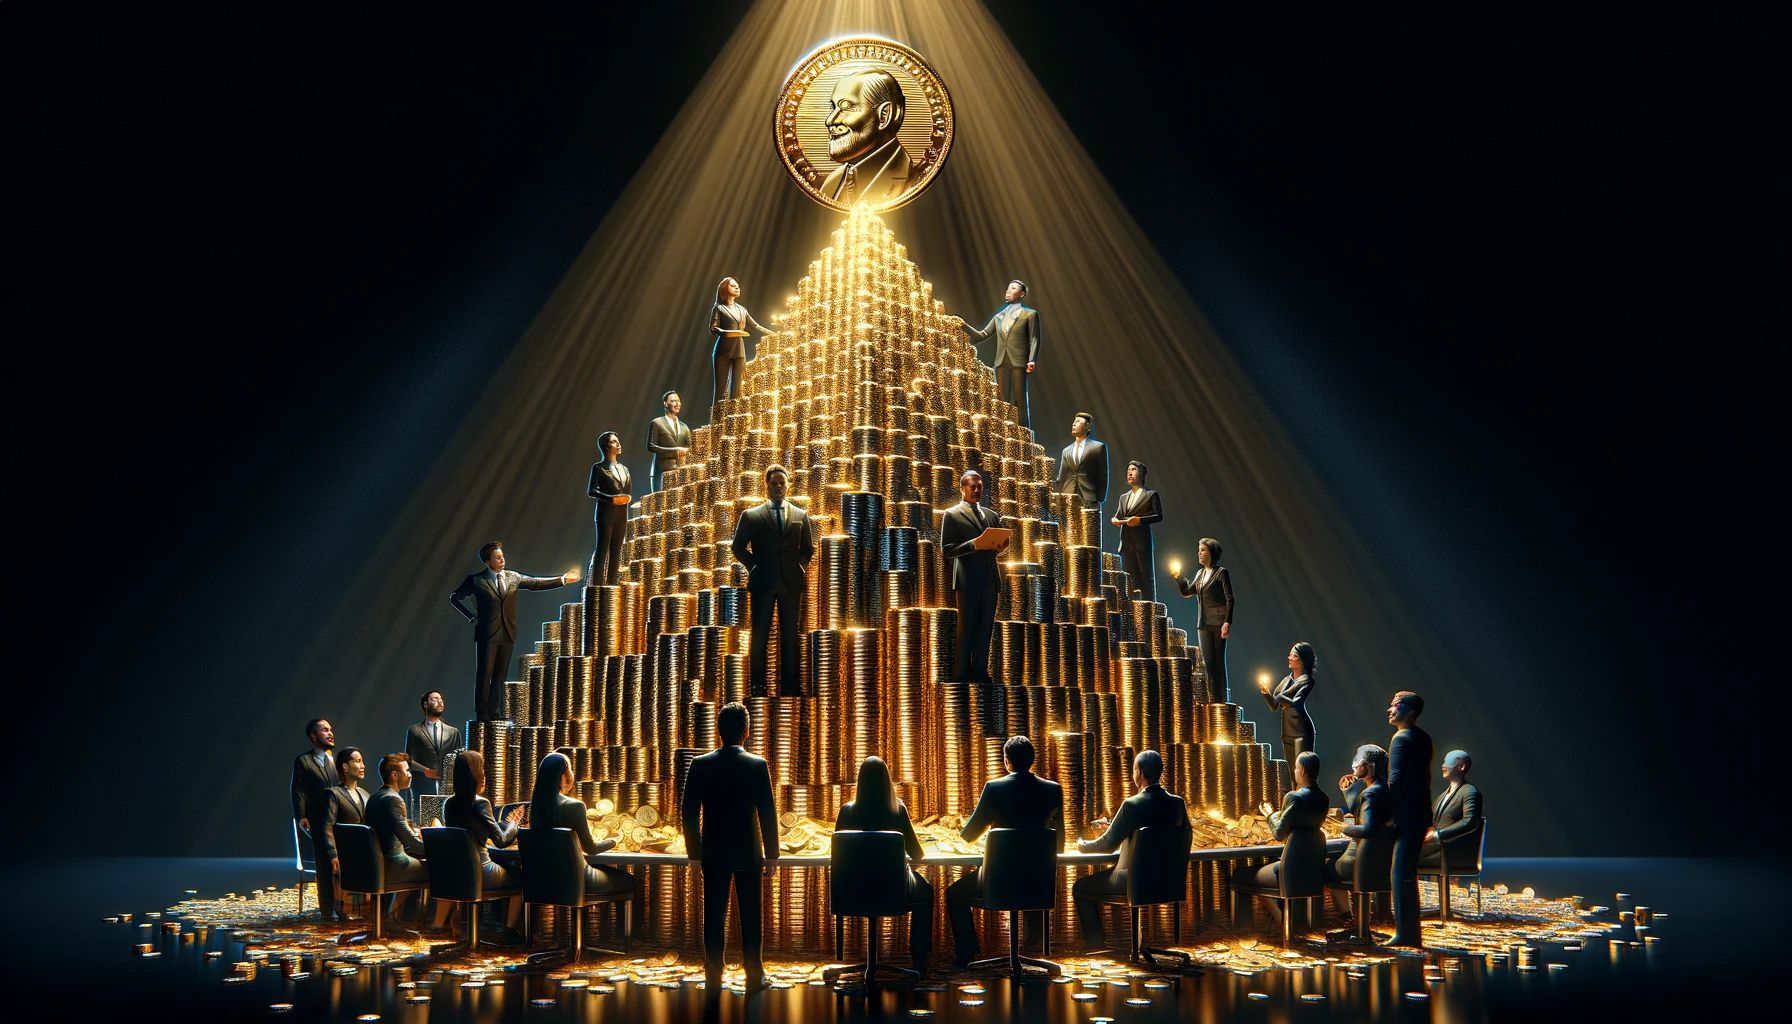 Image that metaphorically depict a Ponzi scheme as a towering pyramid made of gold coins and banknotes, illuminated under a spotlight against a dark background.